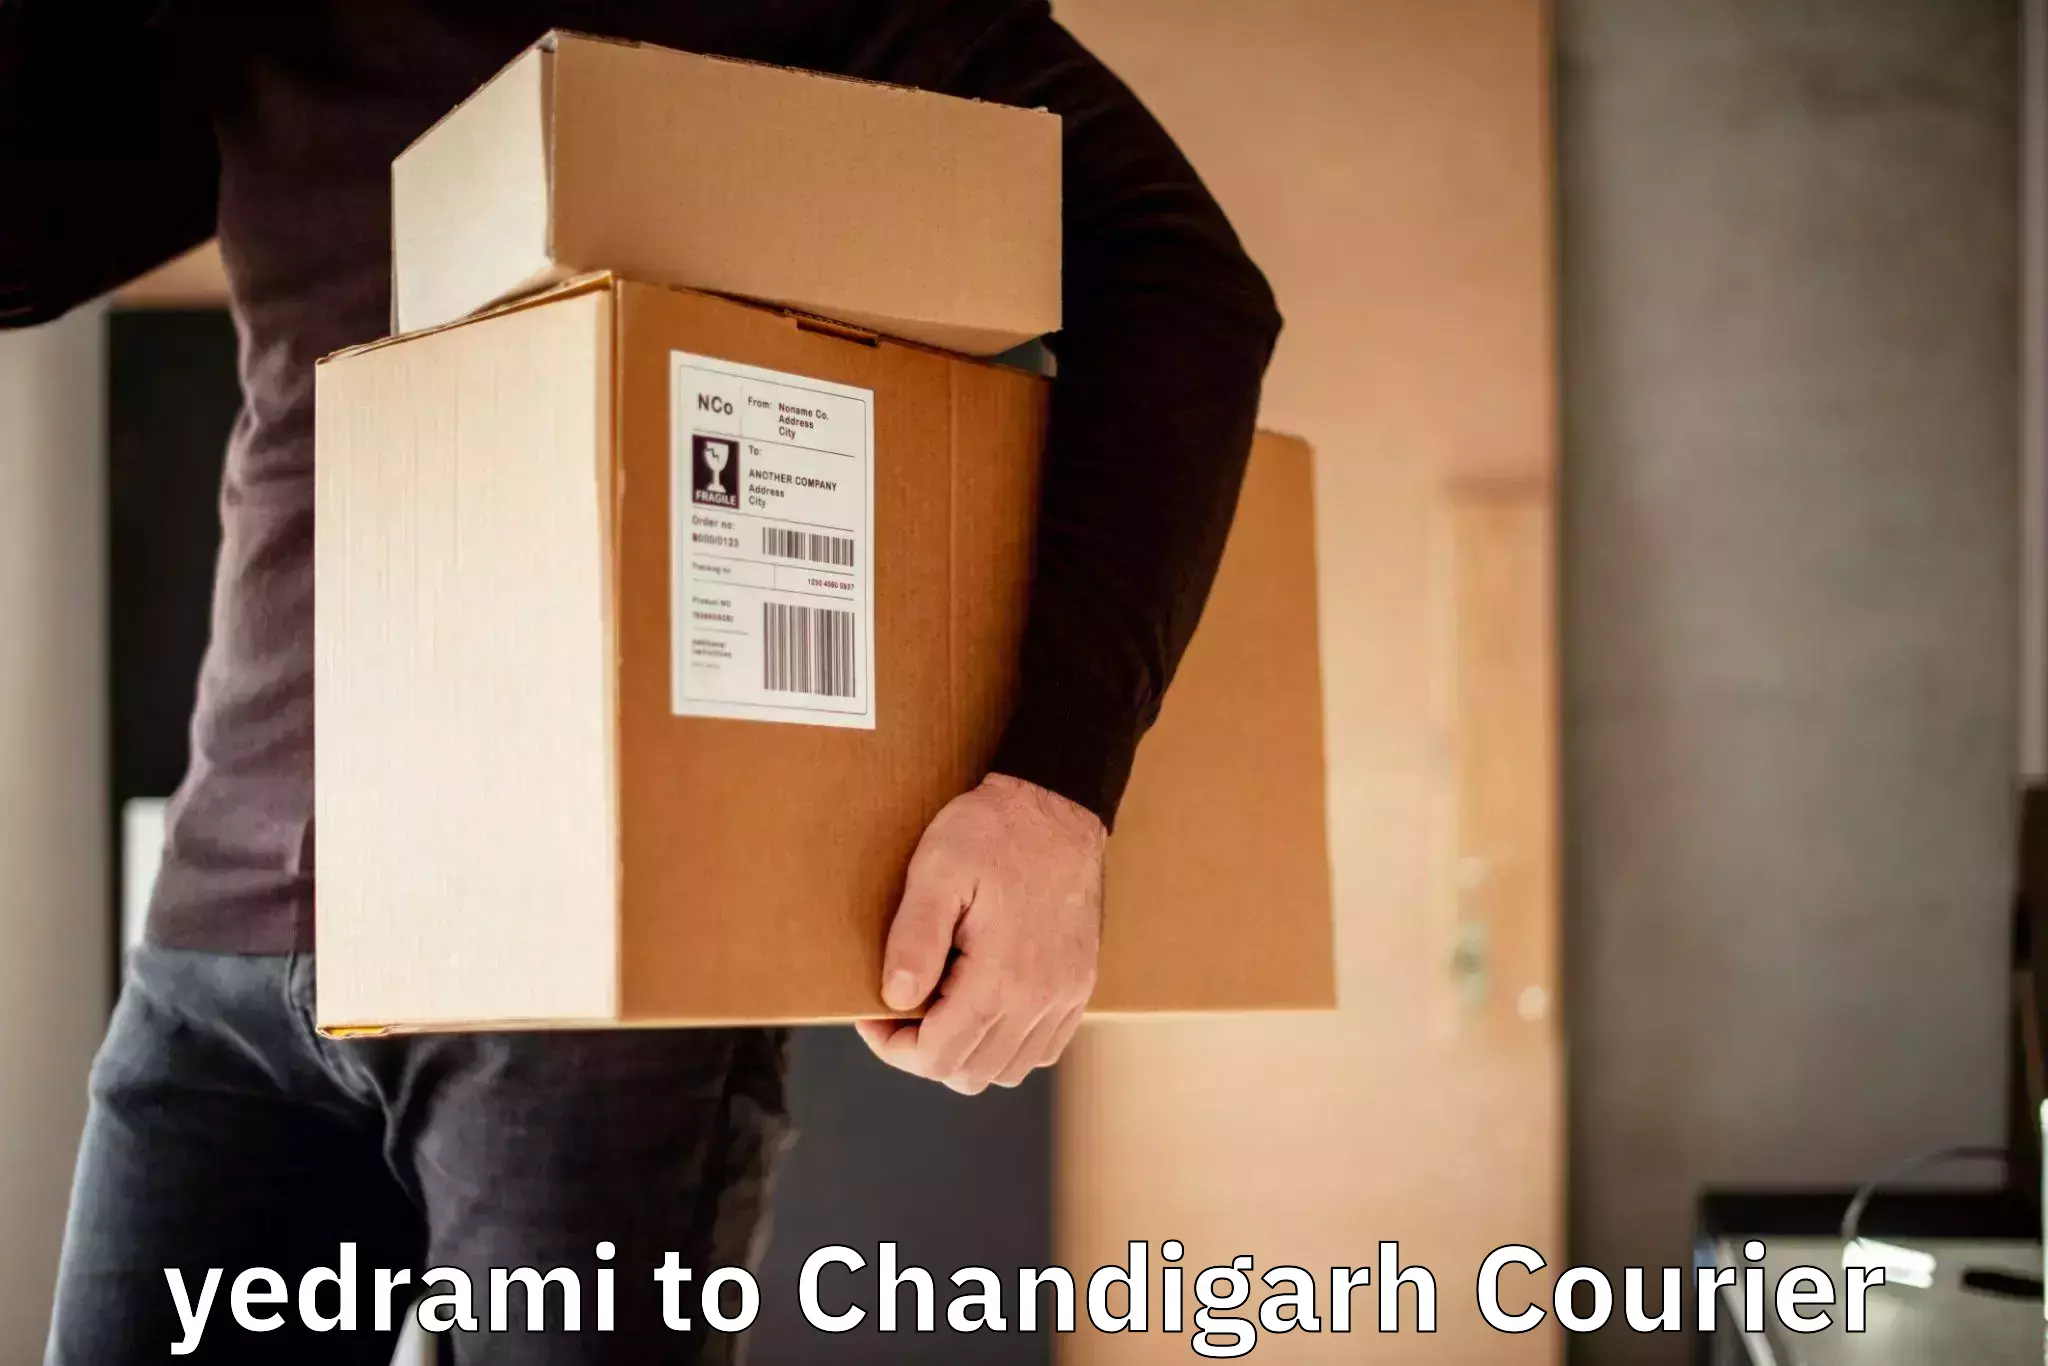 Custom courier packages yedrami to Chandigarh